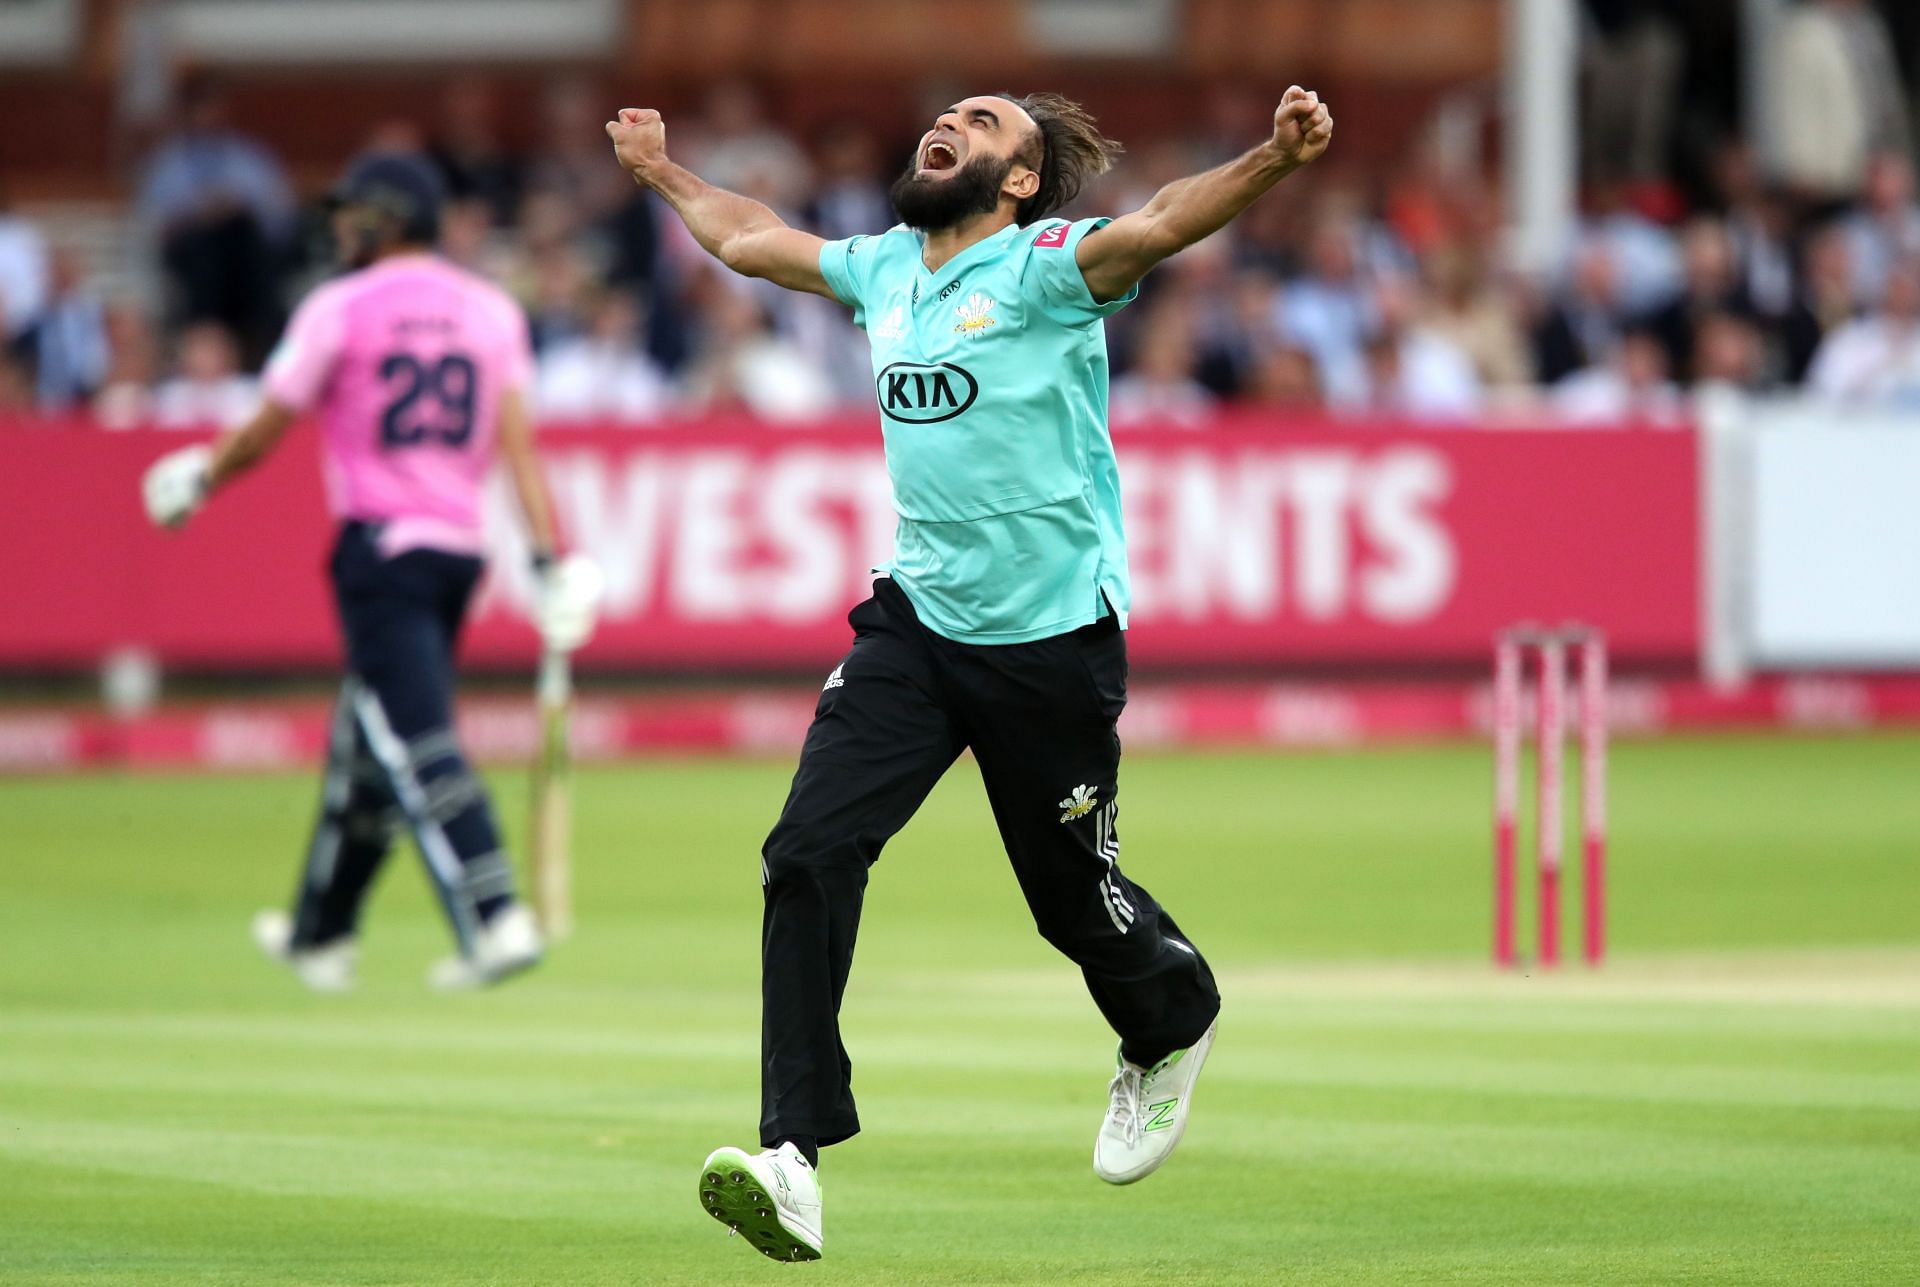 Imran Tahir celebrating a wicket for Surrey in the Vitality T20 Blast.